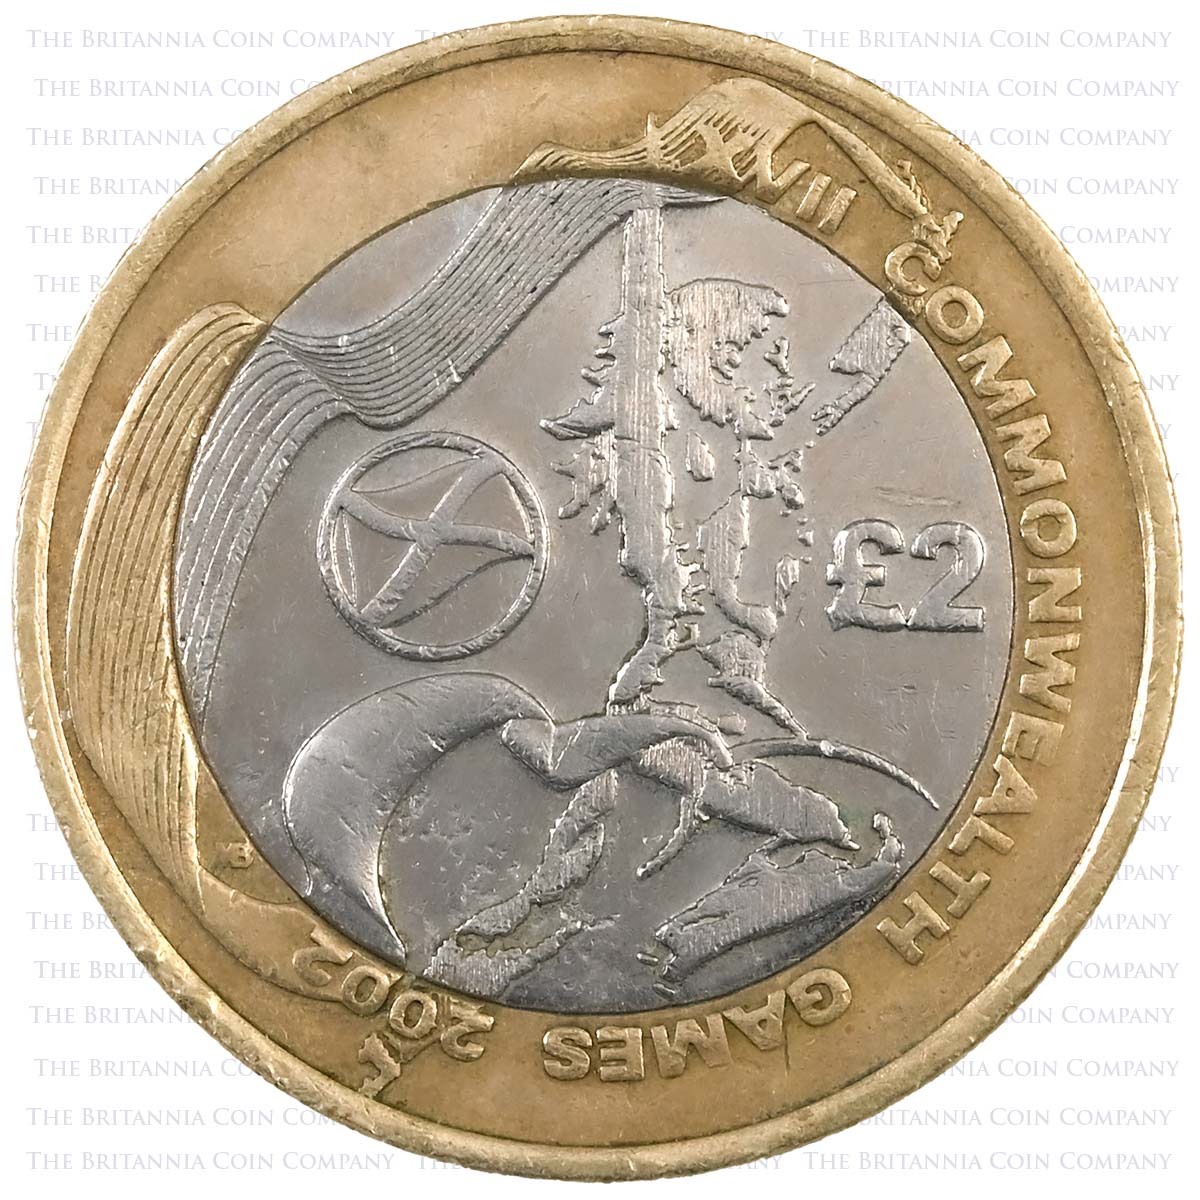 2002 Scotland Commonwealth Games Circulated Two Pound Coin Reverse